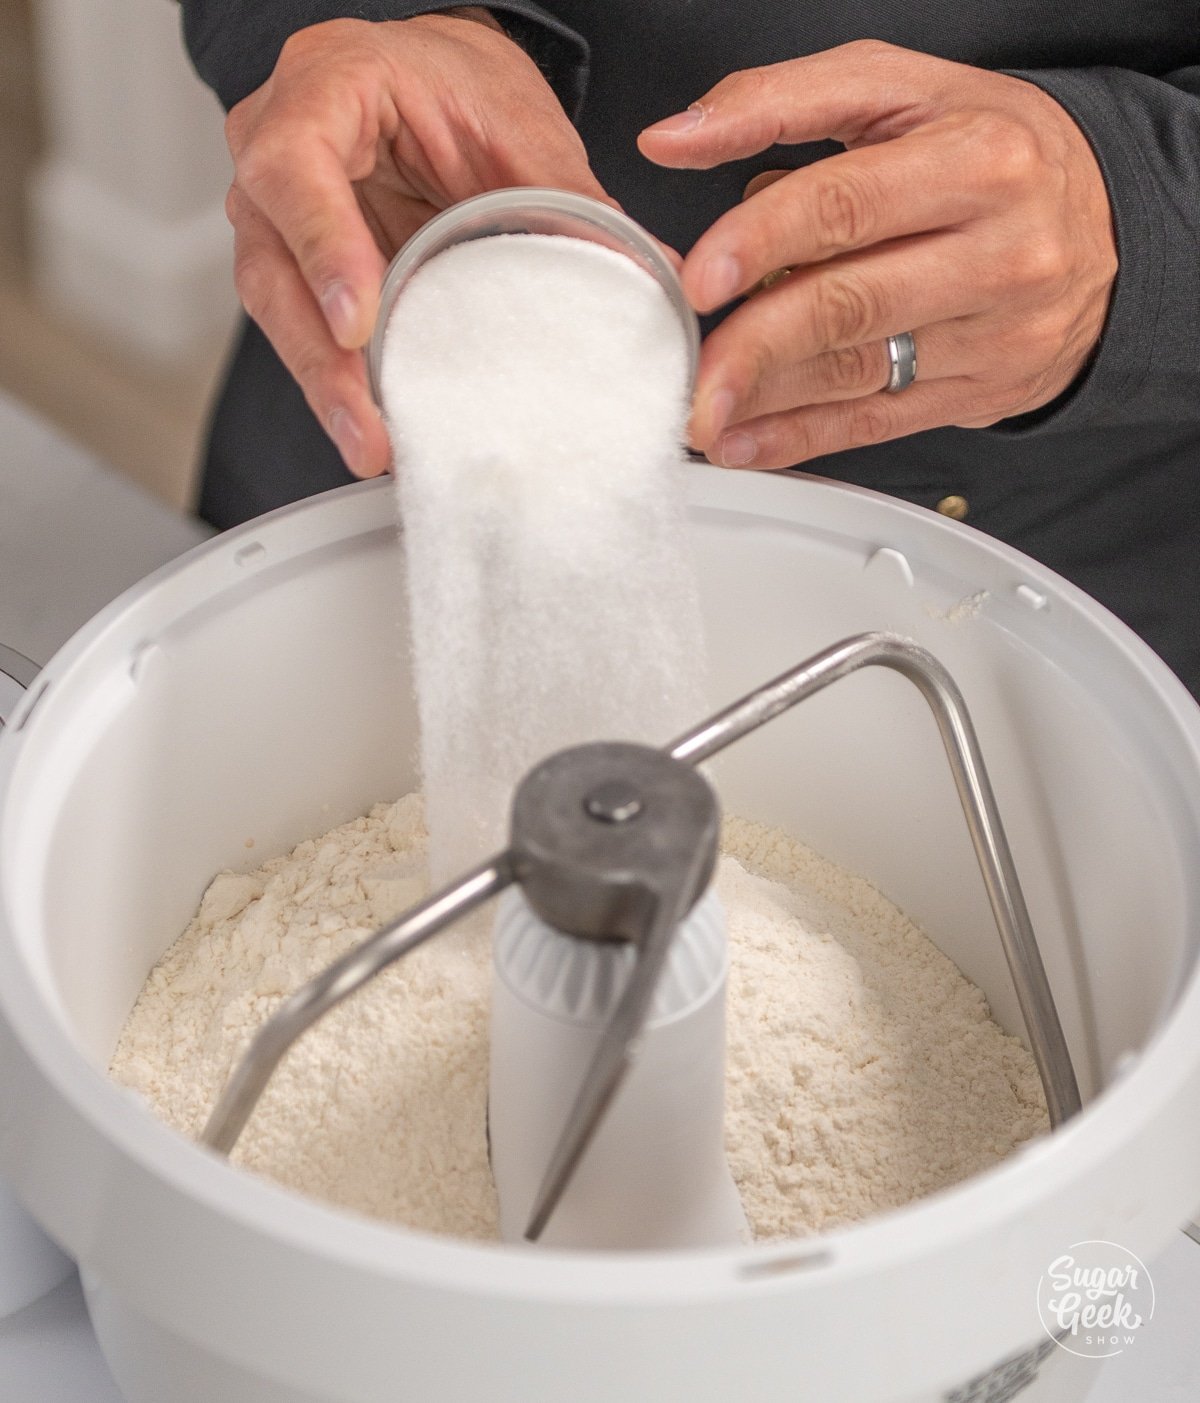 hand adding a bowl of sugar into a white stand mixer bowl